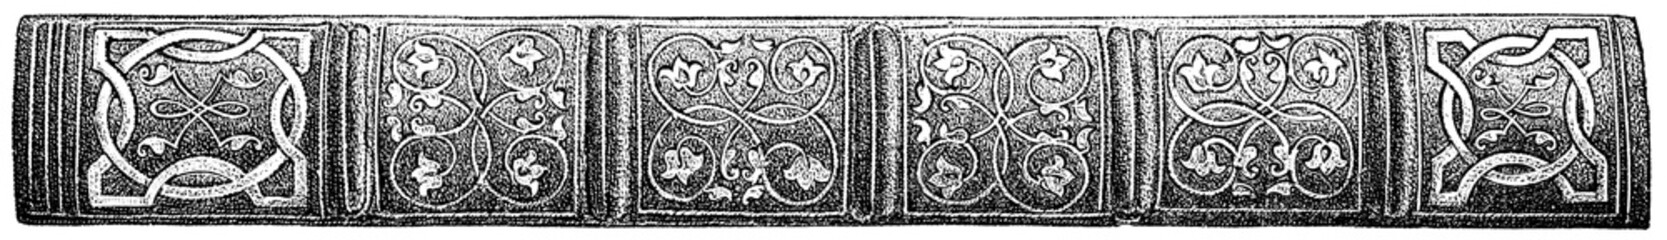 Leather book spine made in Majori style. Early Renaissance. Publication of the book "Meyers Konversations-Lexikon", Volume 7, Leipzig, Germany, 1910